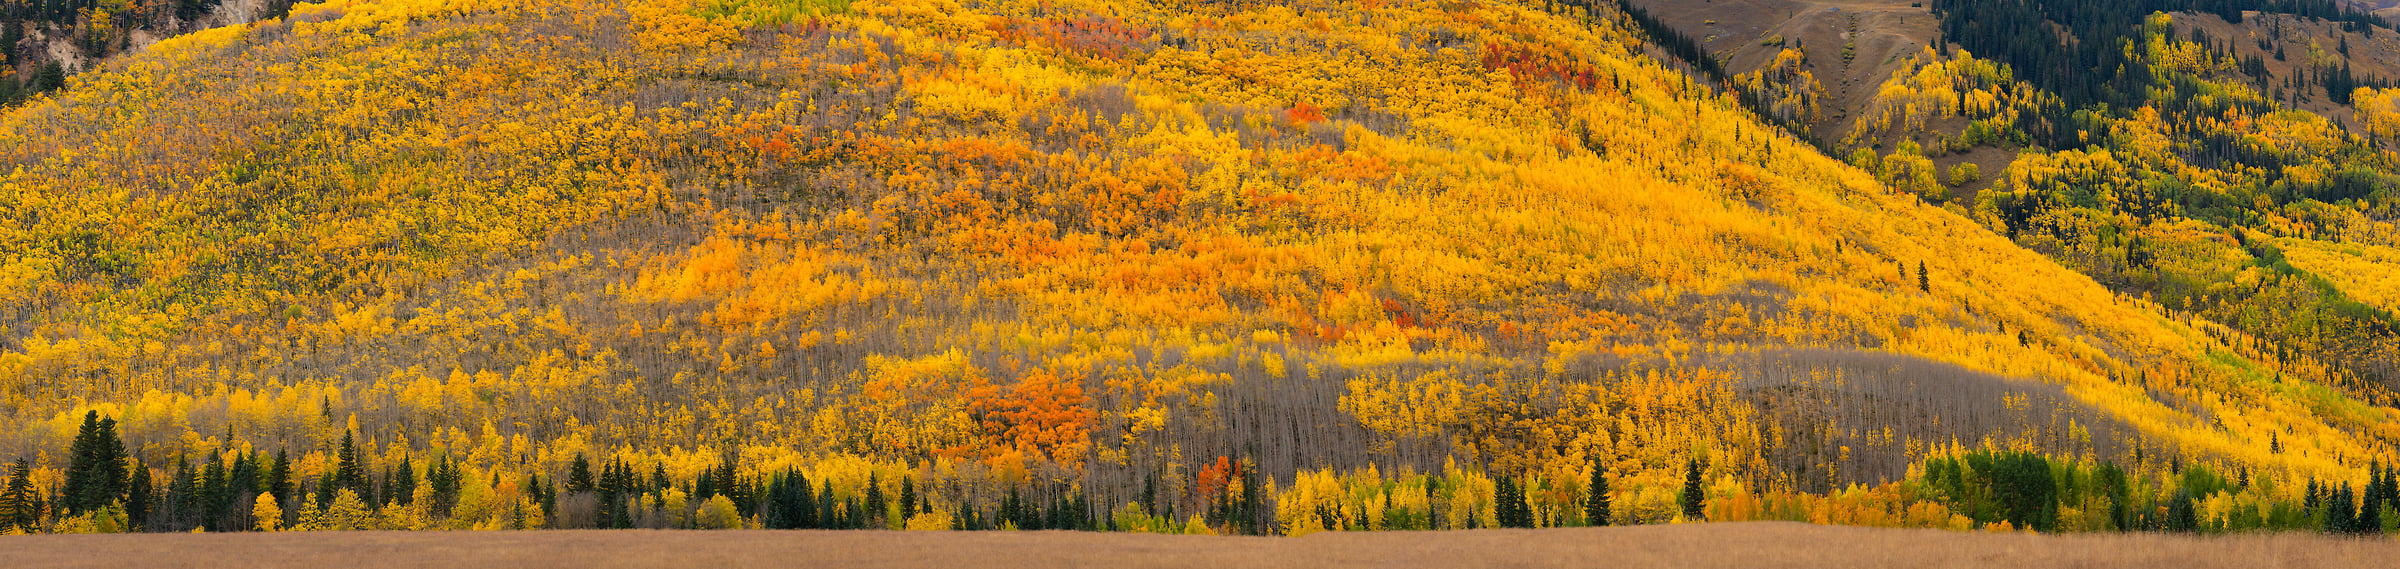 855 megapixels! A very high resolution, large-format VAST photo print of an aspen tree forest; landscape photograph created by Jeff Lewis in Ouray, Colorado